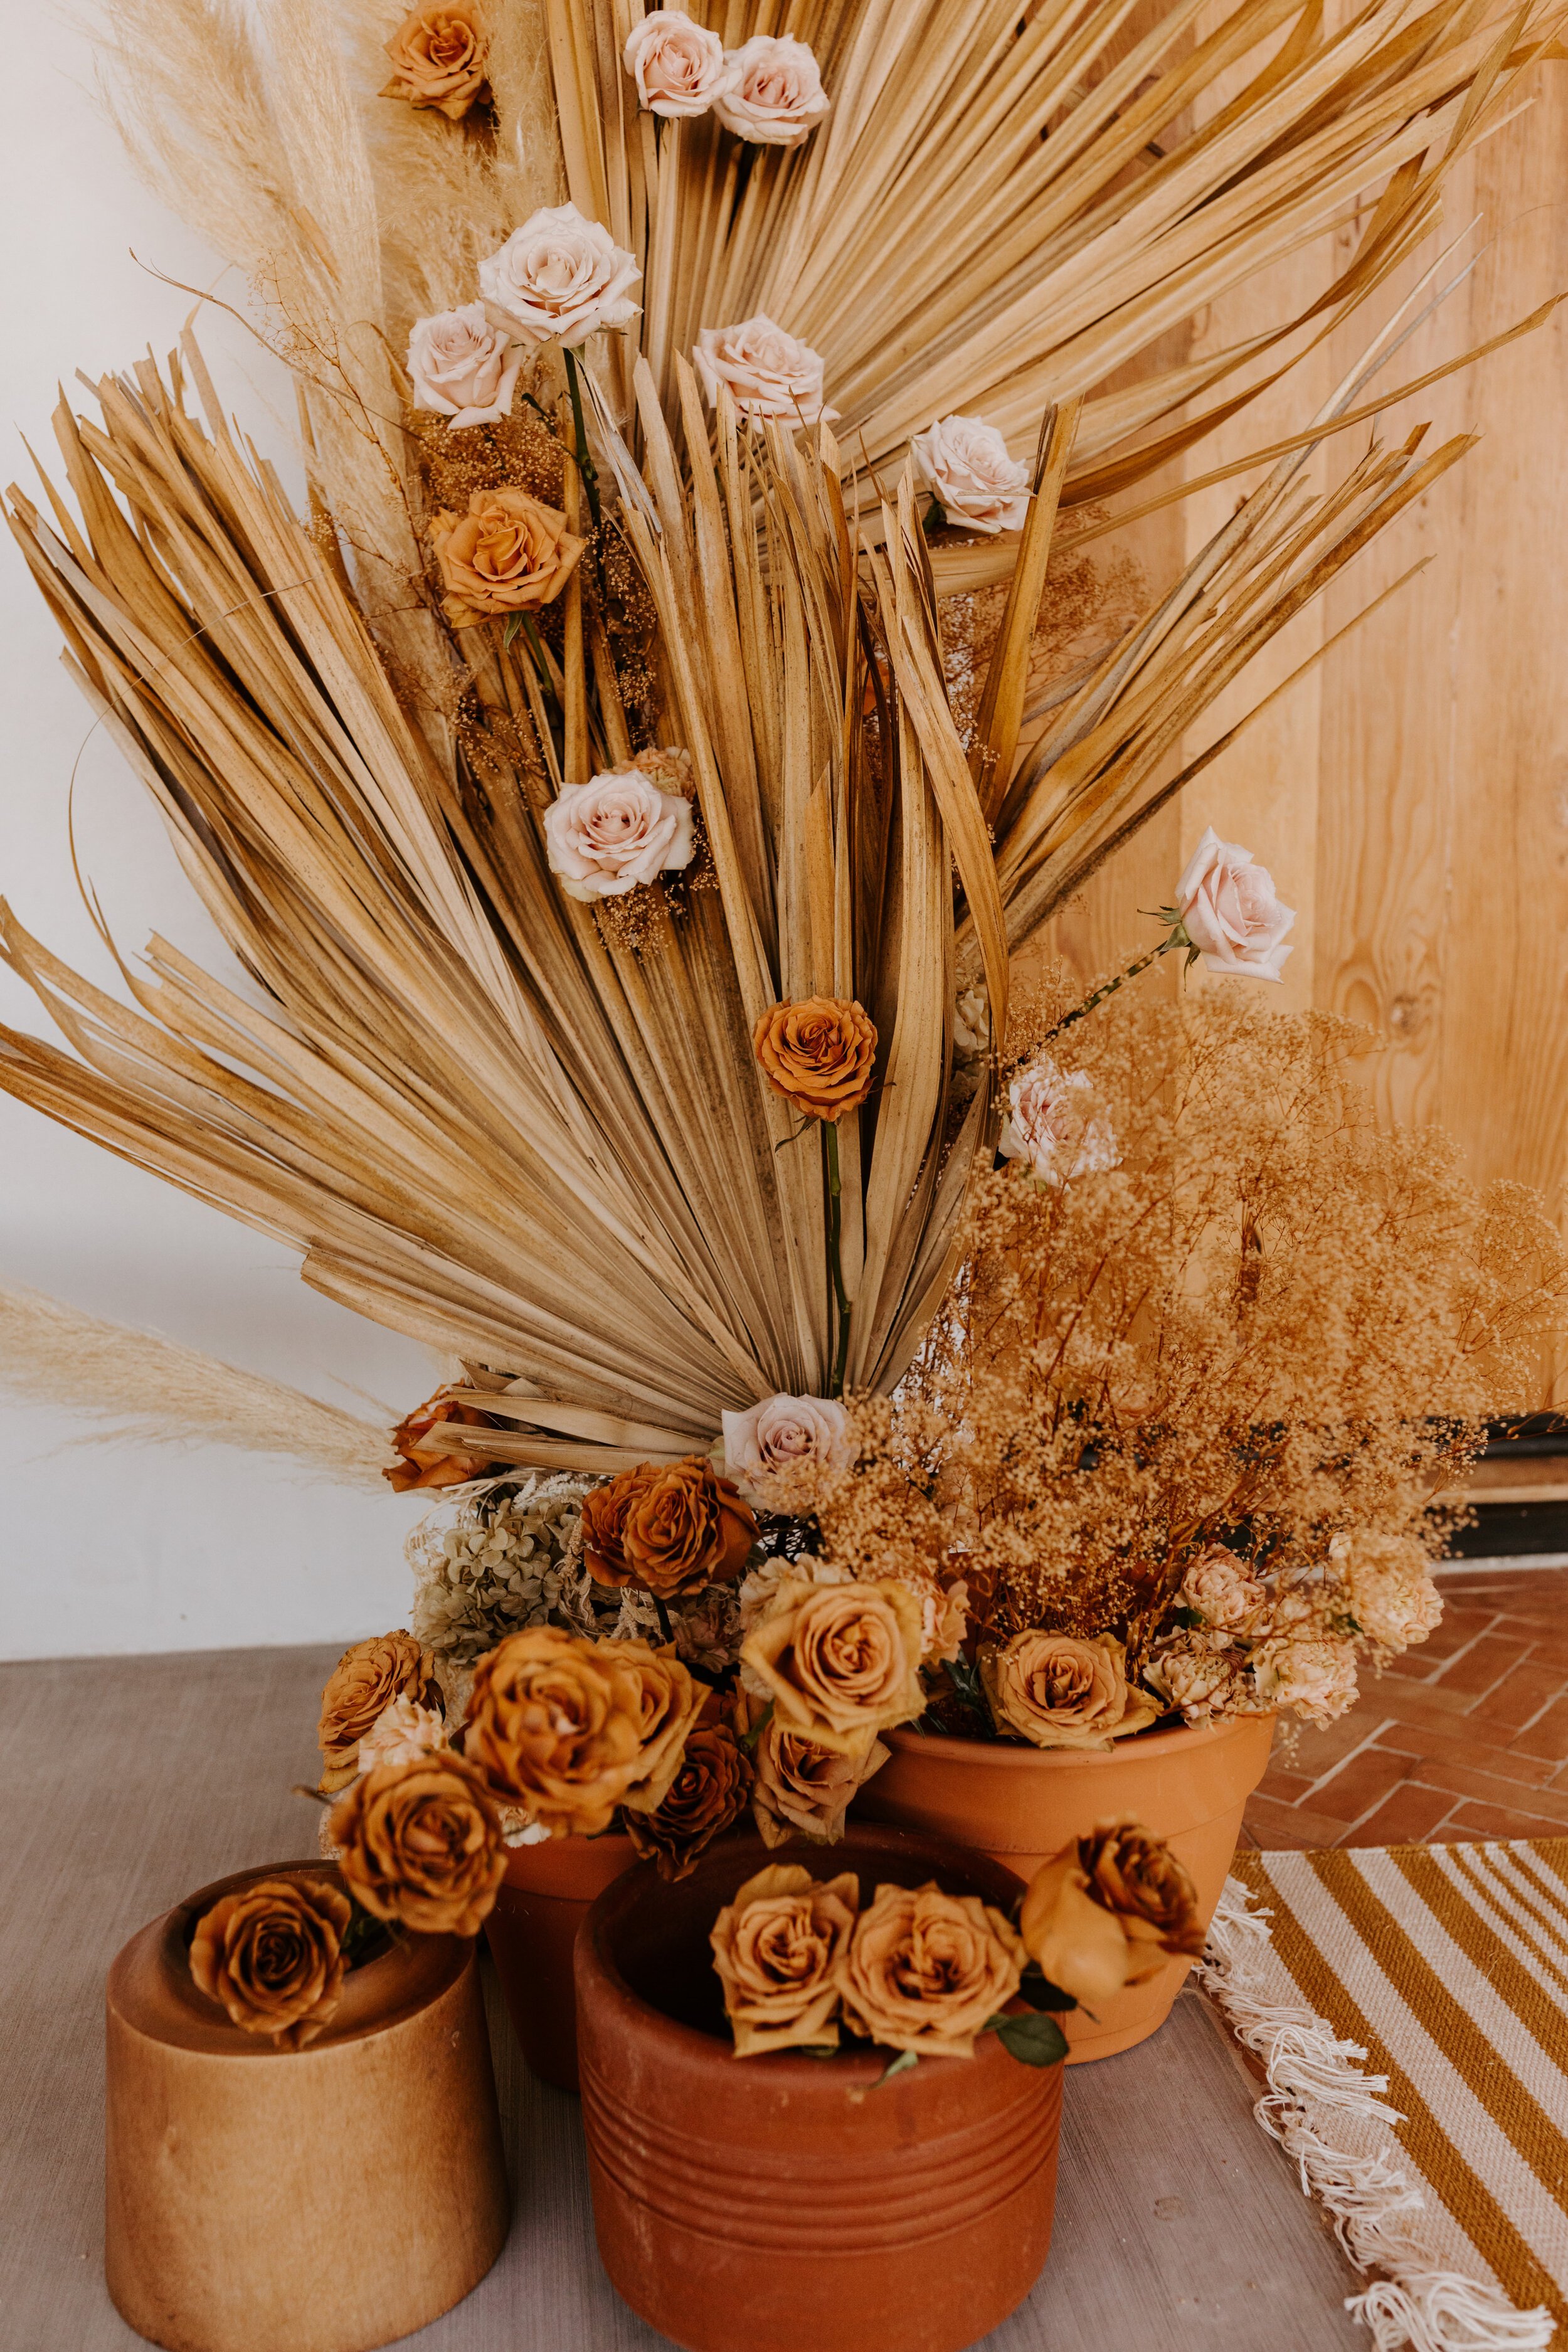 Dried palm leaves rust and neutral color palette wedding arch | Joshua Tree Elopement | Florals by Cultivated by Faith | Photo by Tida Svy | www.tidasvy.com